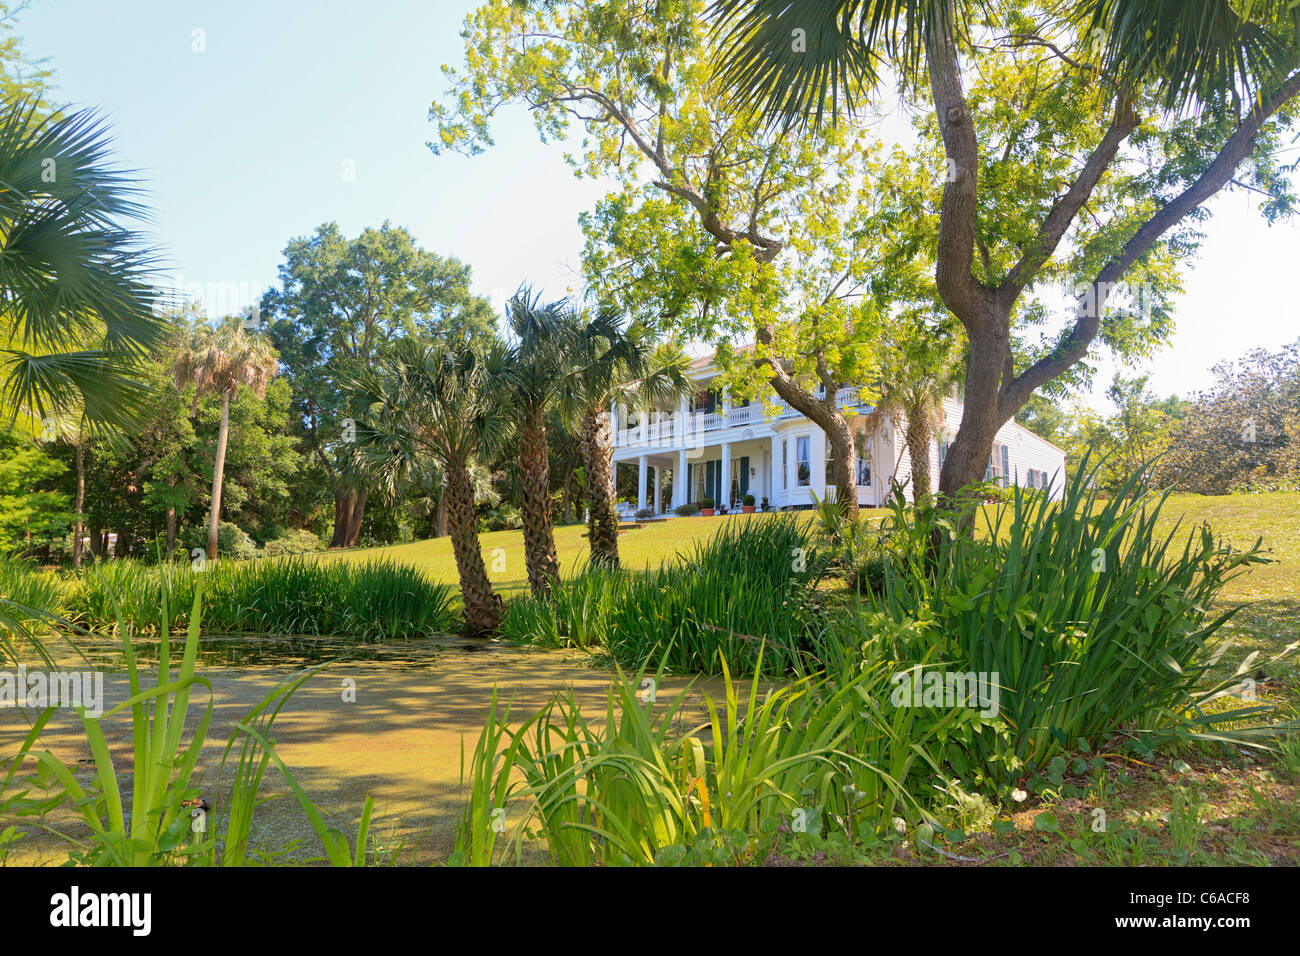 Florida Panhandle Historic High Resolution Stock Photography And Images Alamy